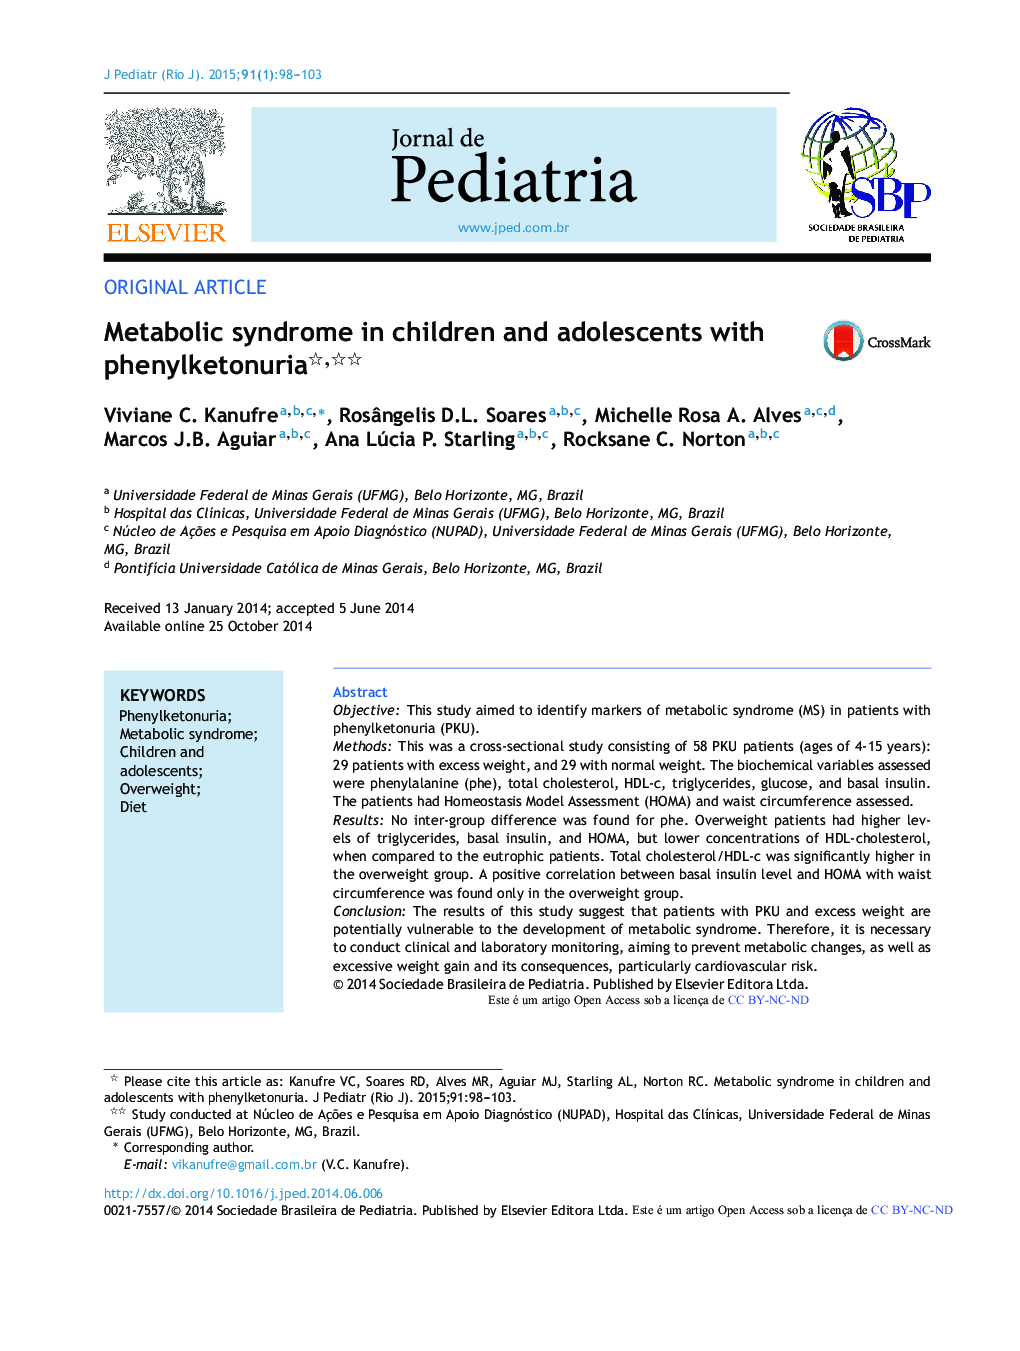 Metabolic syndrome in children and adolescents with phenylketonuria 